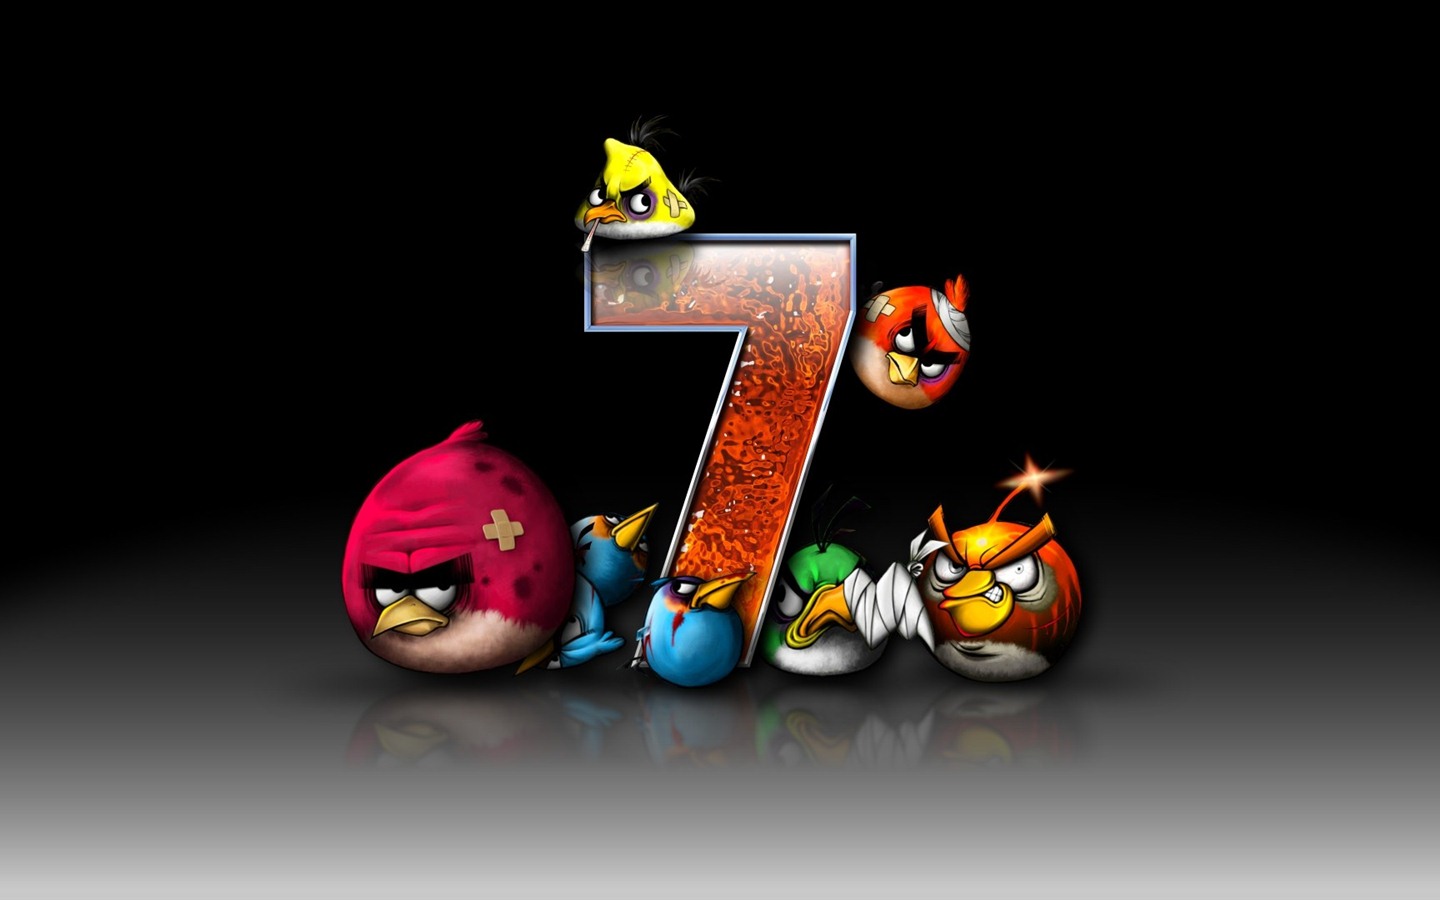 Angry Birds Spiel wallpapers #17 - 1440x900